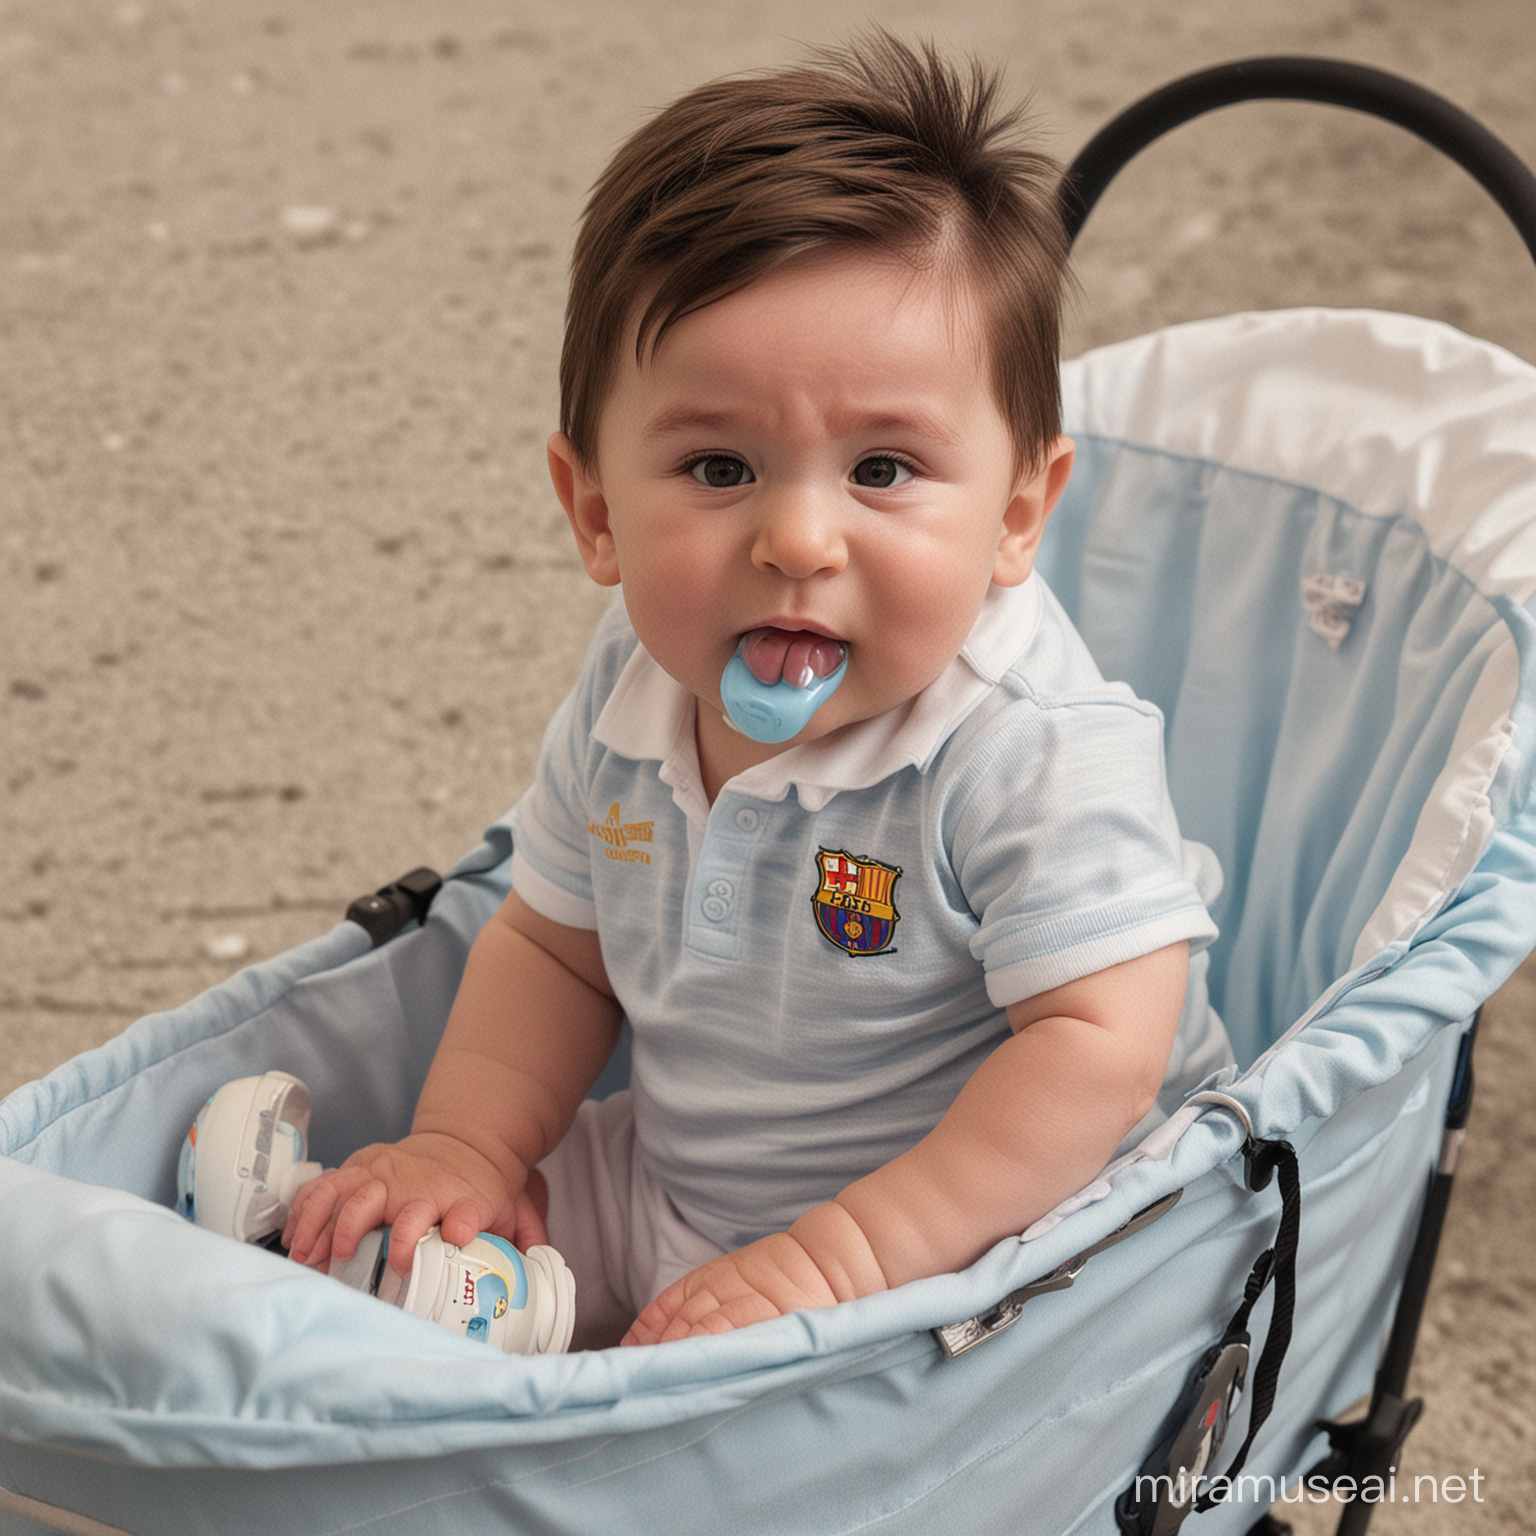 Adorable Baby Lionel Messi Relaxing in Pram with Pacifier